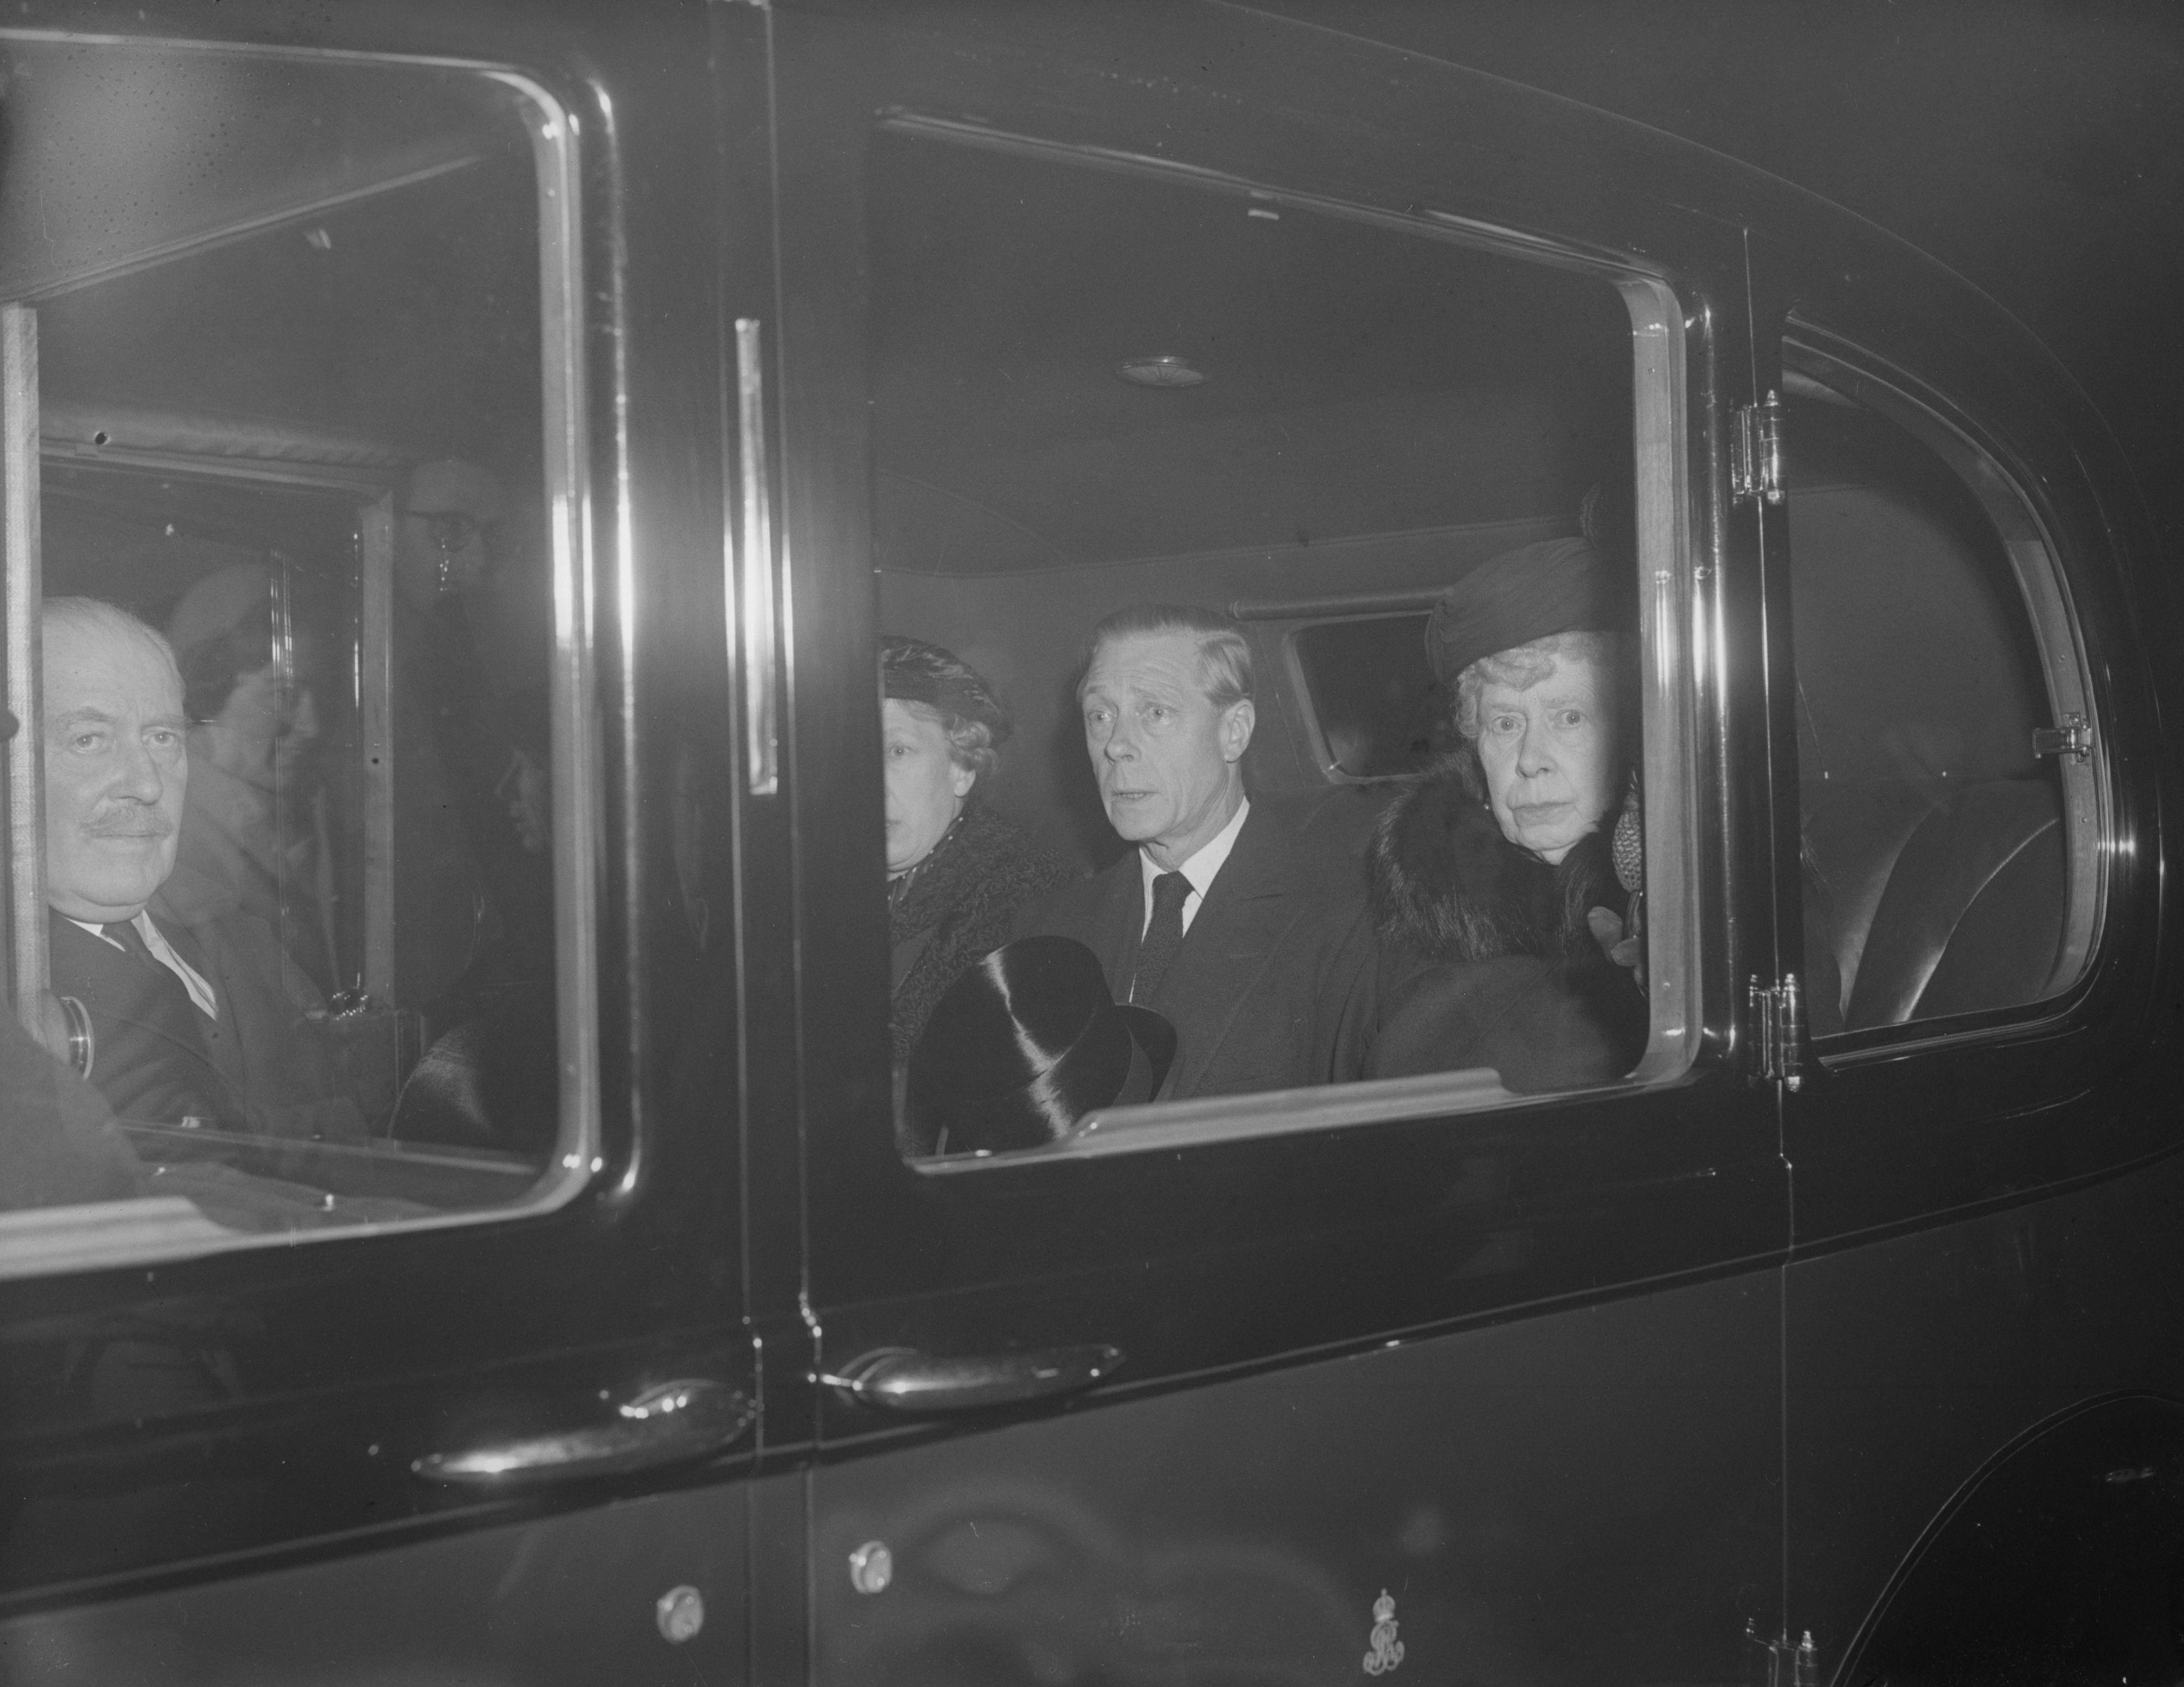 <p>On Feb. 14, 1952 -- the day before King George VI's funeral -- his elder brother, the Duke of Windsor (known as King Edward VIII before his abdication); mother Queen Mary; and sister Princess Mary made their way to pay their respects at the late king's lying-in-state in Westminster Hall in London.</p>